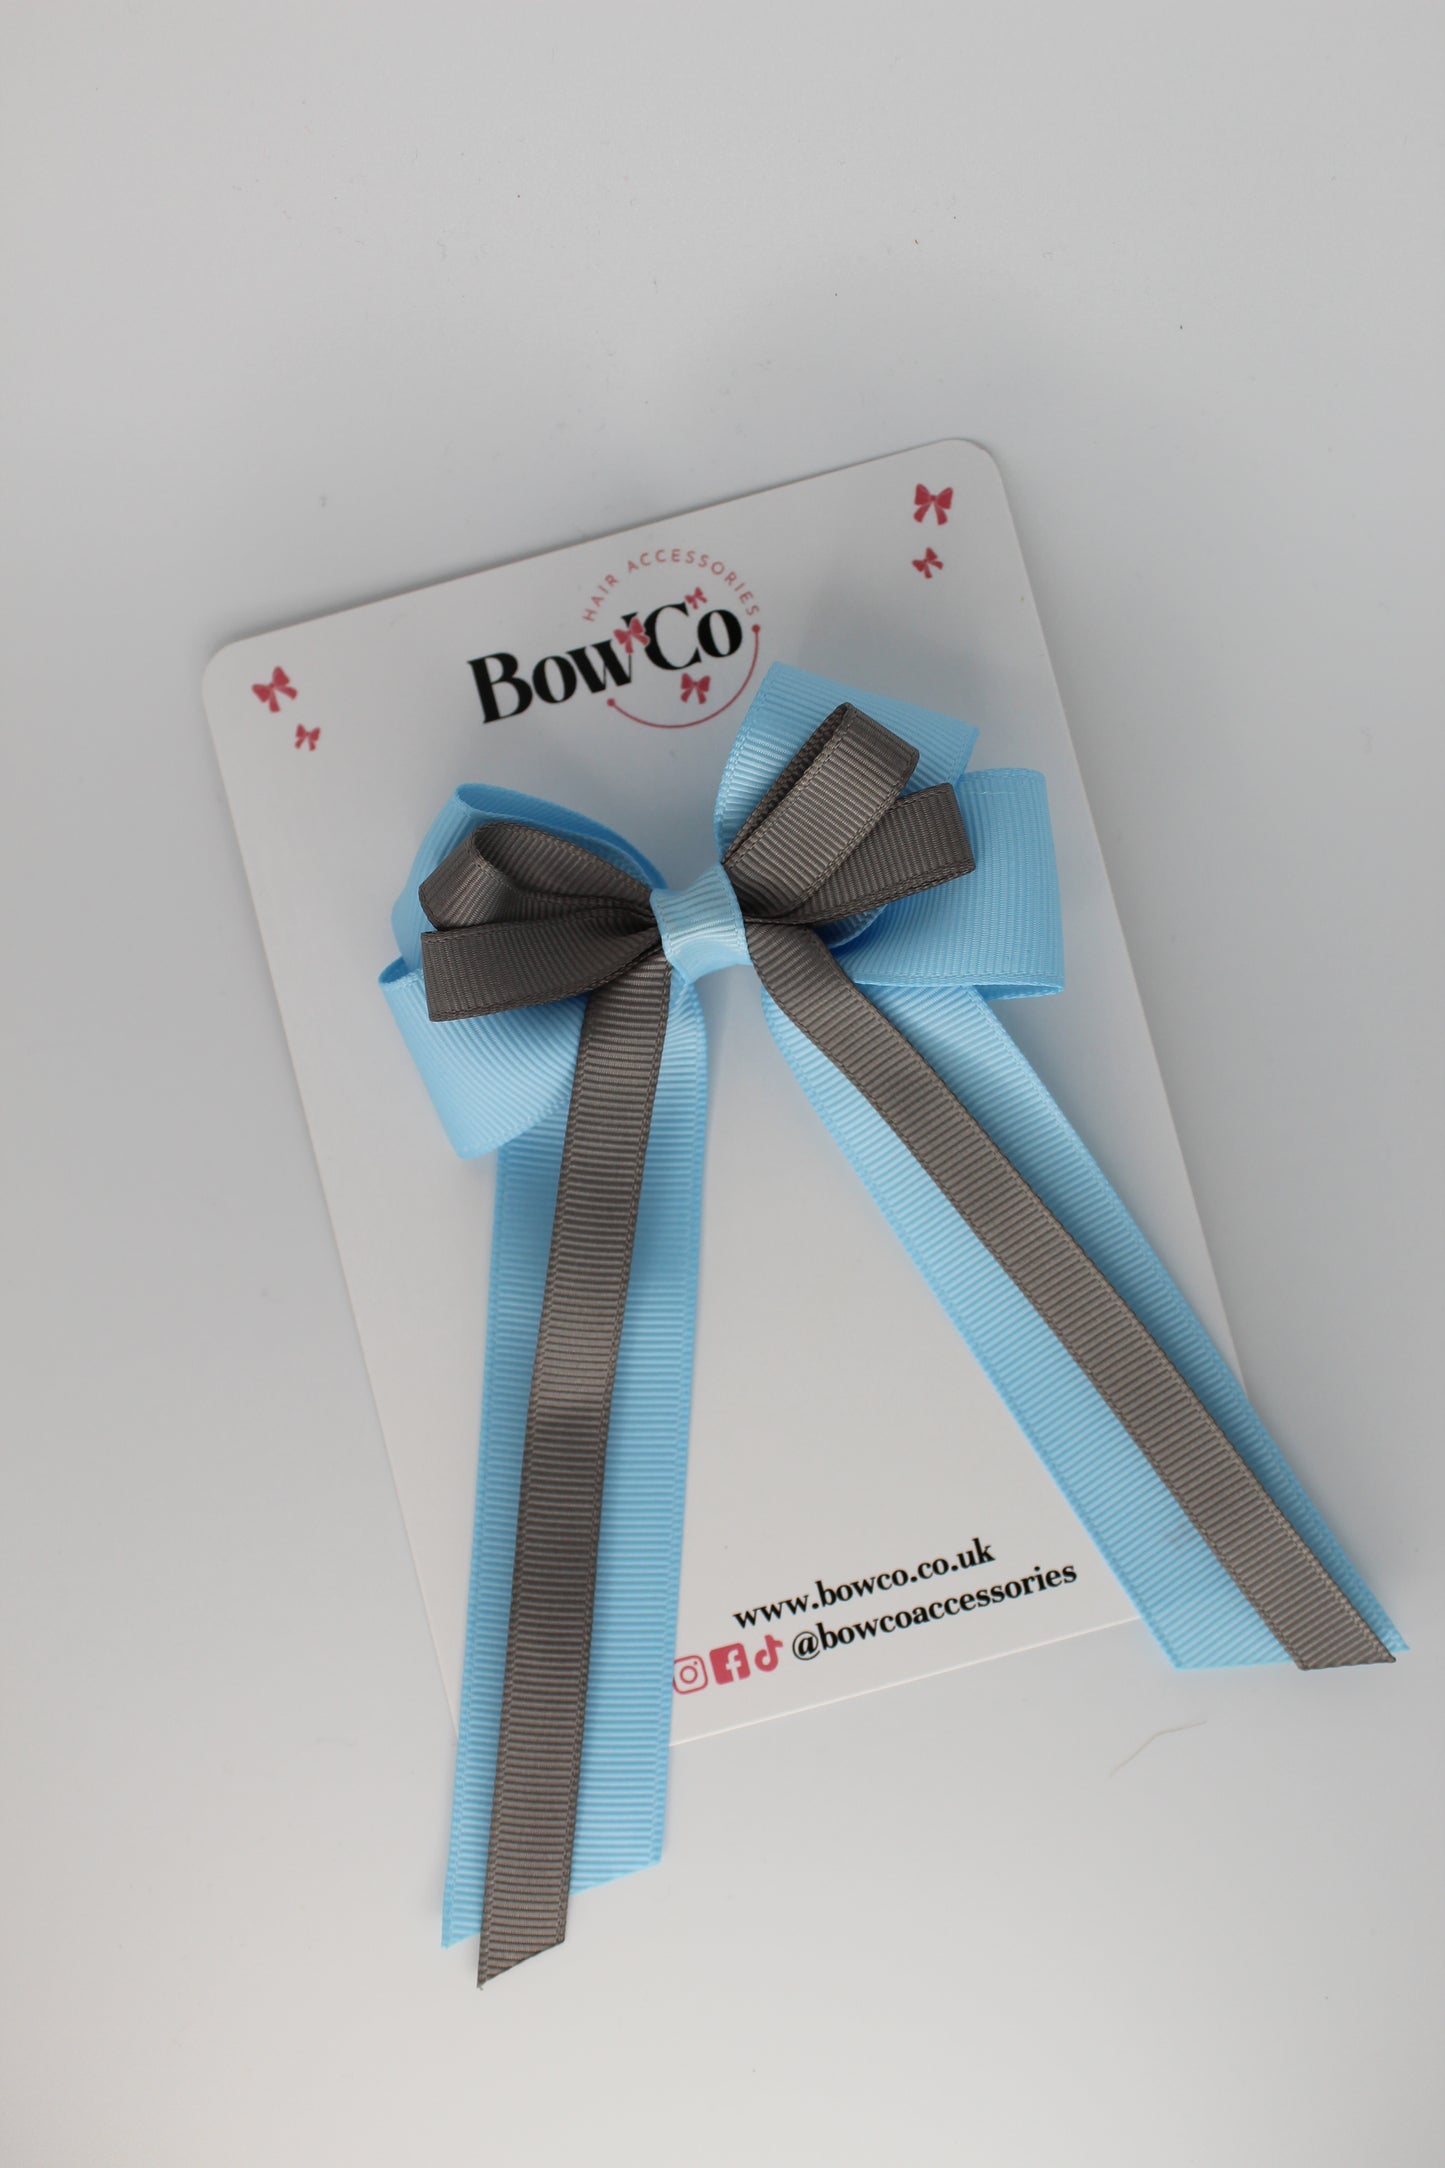 4 Inch Loop Bow Clip PonyTail - Blue Topaz and Metal Grey